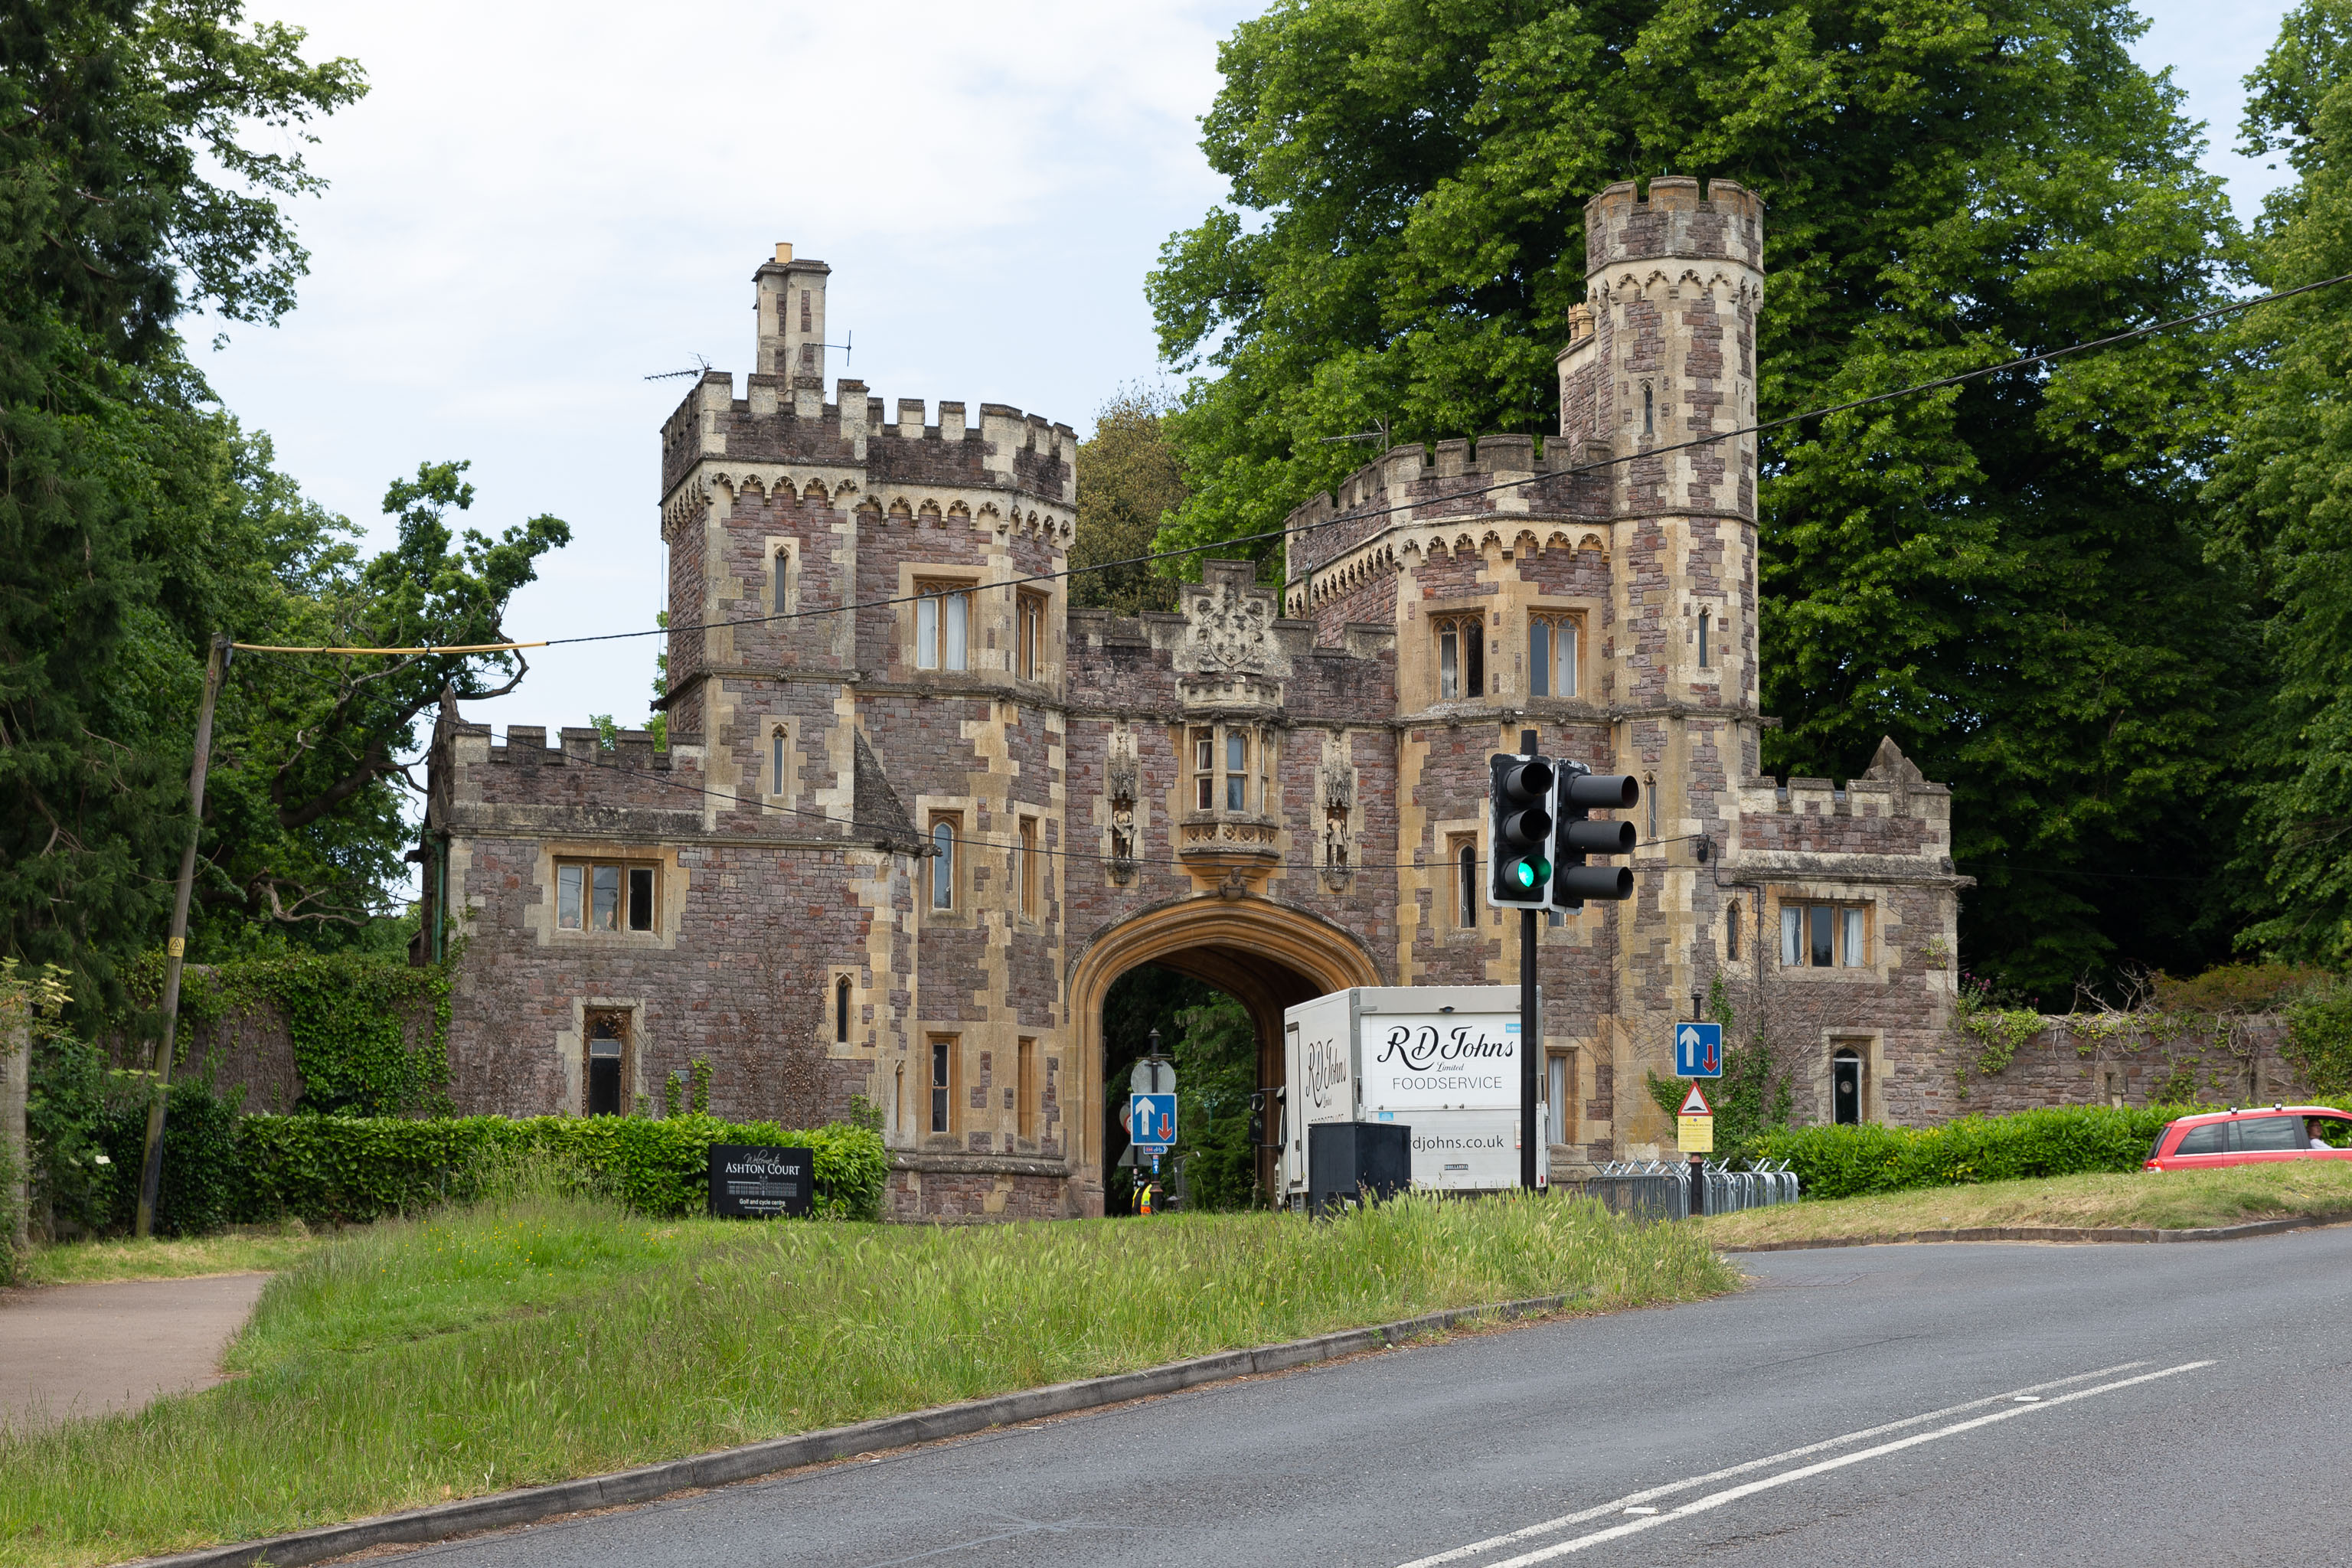 Gatehouse
While my main target is Leigh Woods, I do also want to nip into Ashton Court and walk a little path I missed last time I was in the field with the...